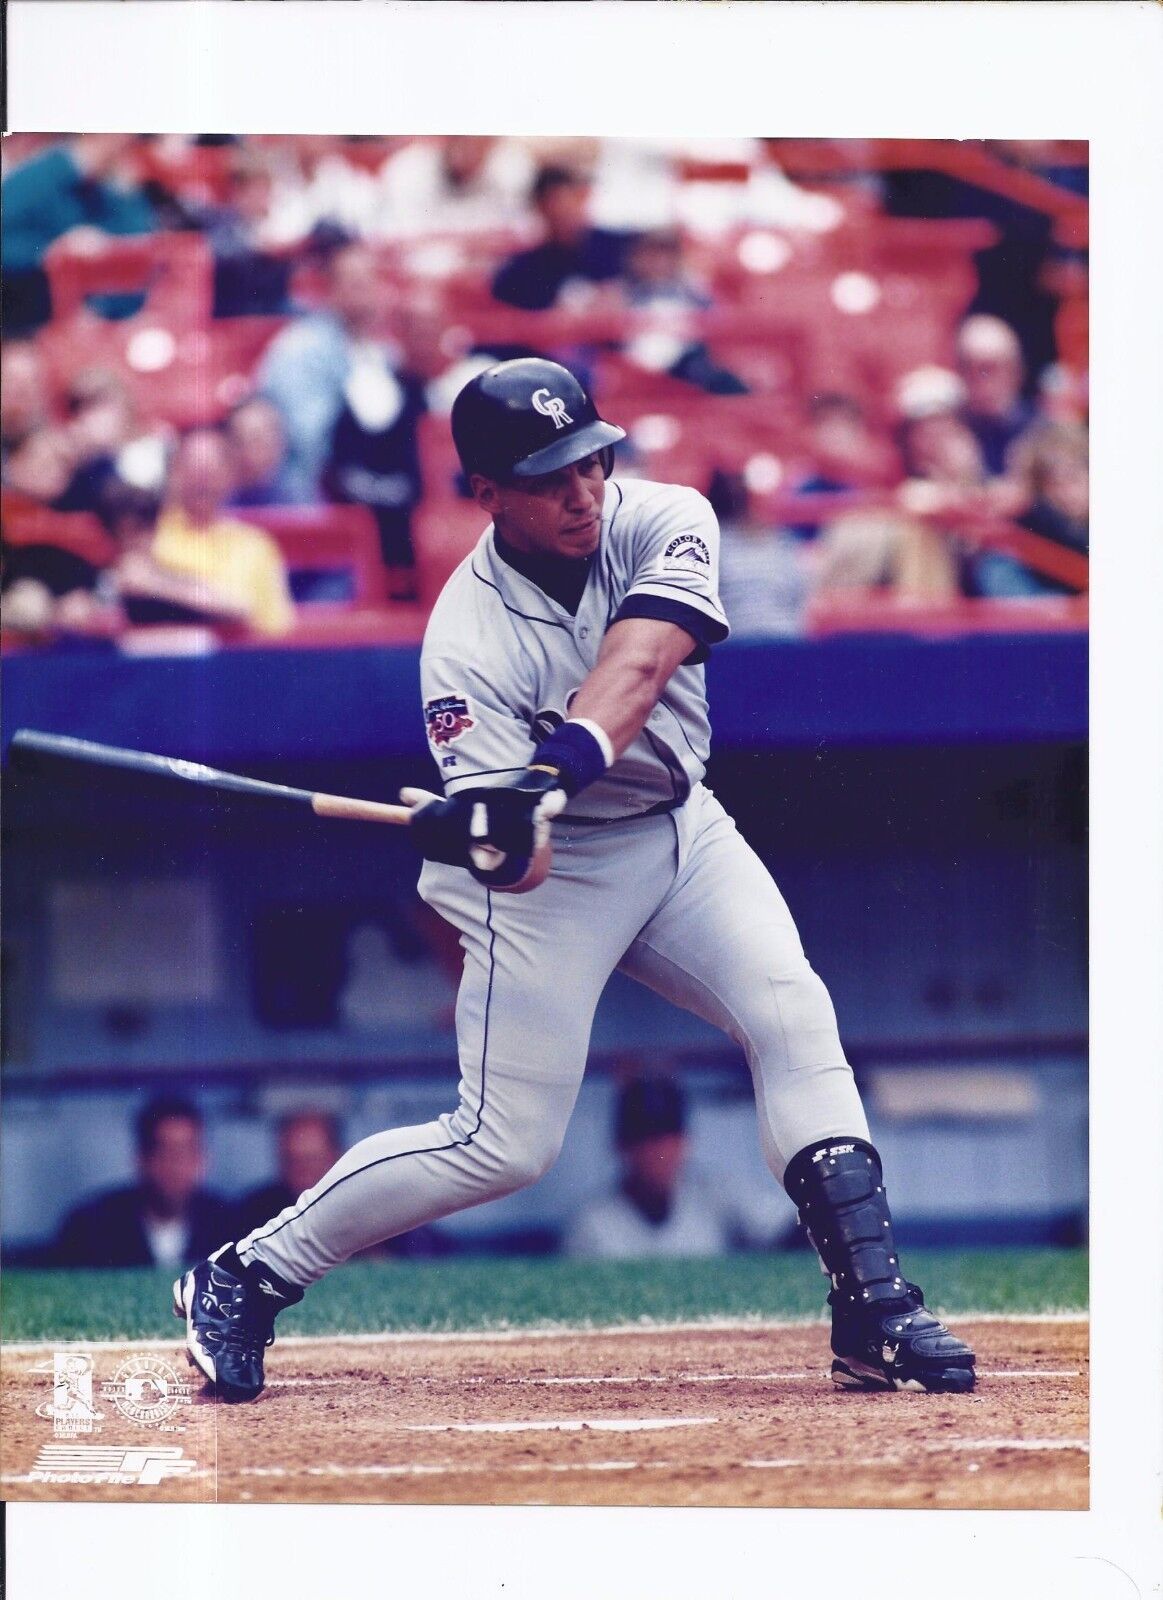 Primary image for andres galarraga 8x10 Unsigned Photo MLB Expos Cardinals Rockies Braves